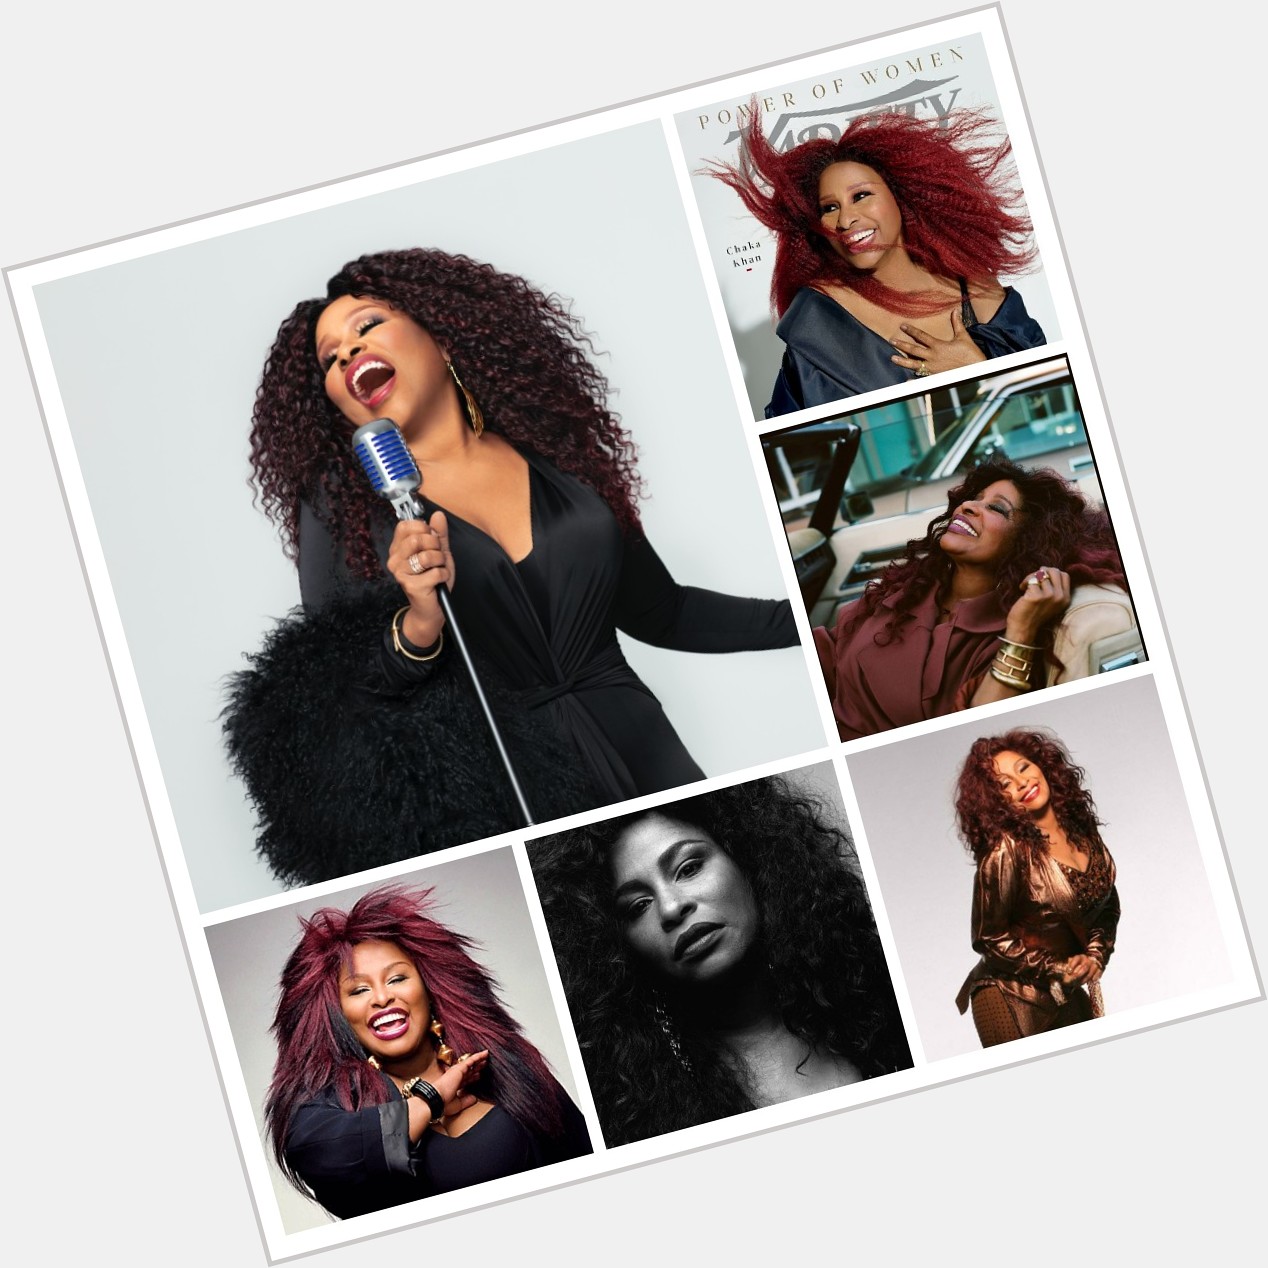 HAPPY BIRTHDAY to one of my Musical Queens, Ms. Chaka Khan   March 23, 2020   